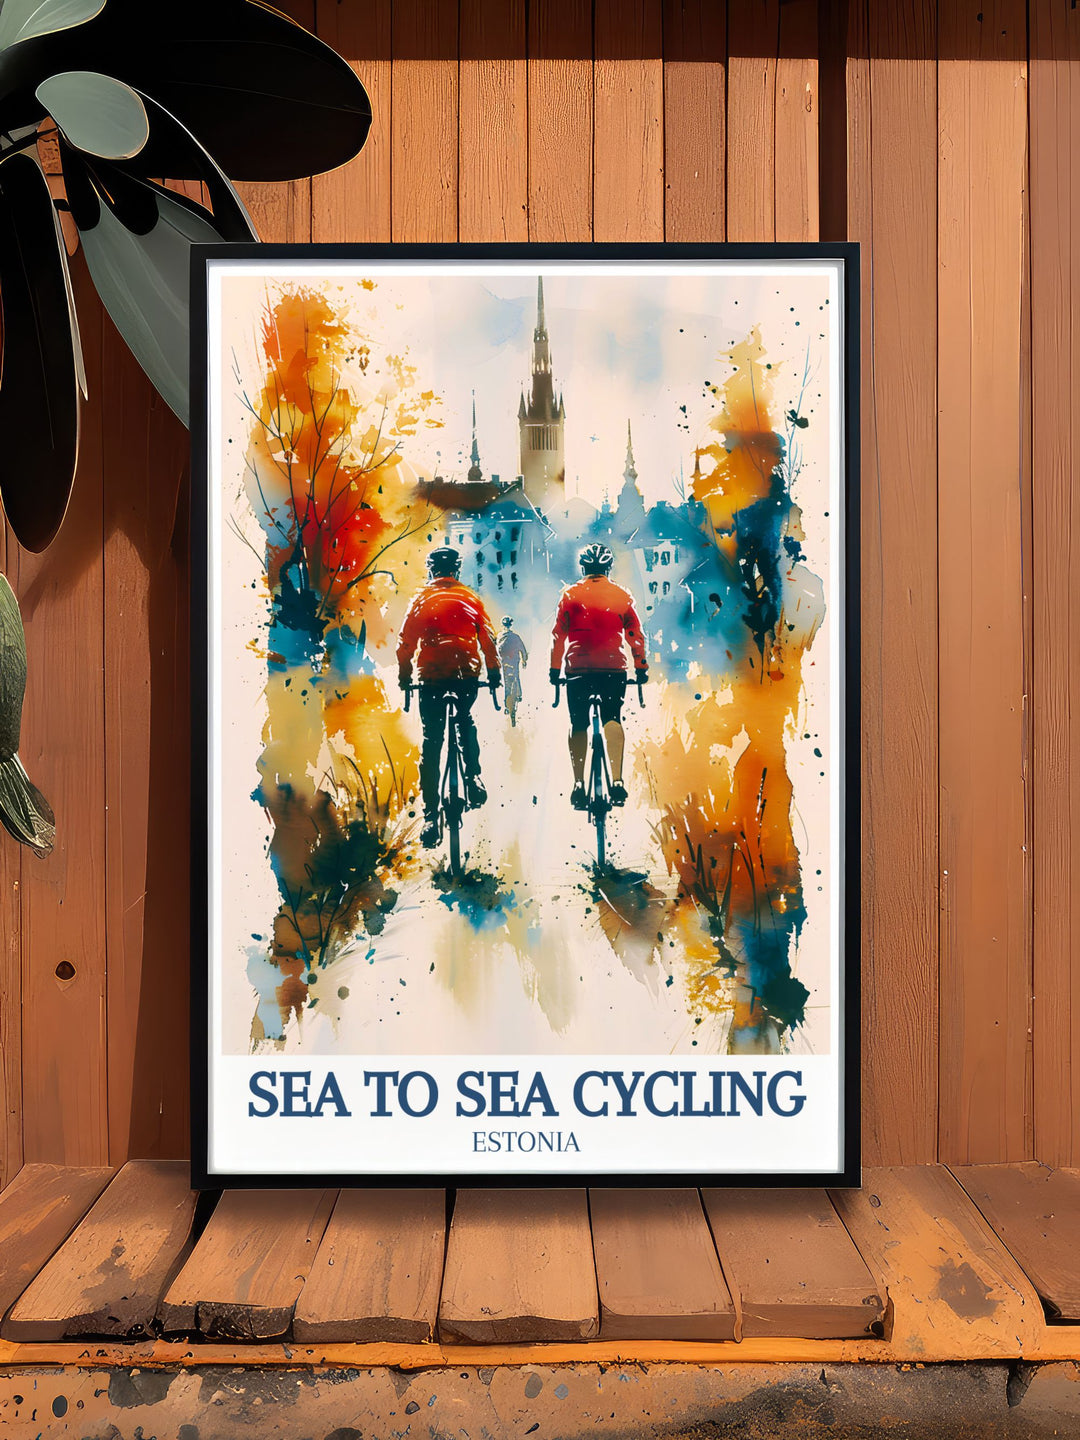 The Old Town of Tallinn is beautifully illustrated in this cycling poster, showcasing its medieval architecture and historical significance, making it an excellent addition to any cycling enthusiasts collection.